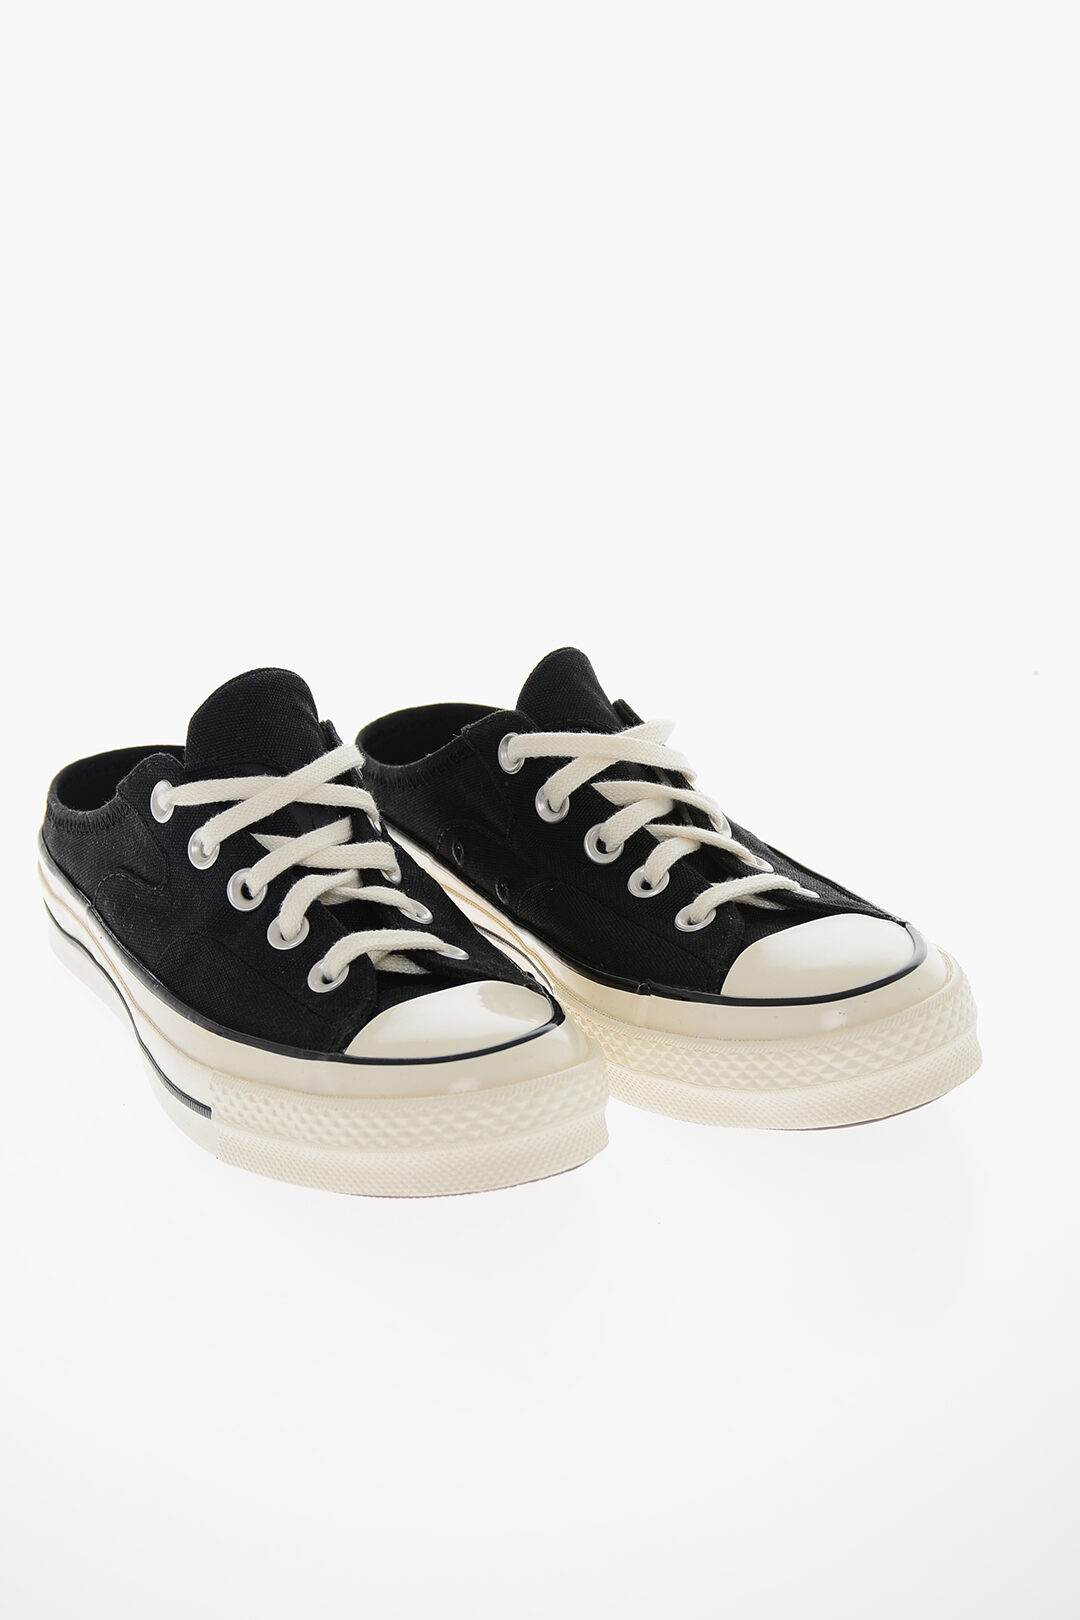 Hen Mompelen Conserveermiddel Converse ALL STAR CHUCK TAYLOR Cotton 70 Mules Low-Top Sneakers with  Contrasting Laces women - Glamood Outlet